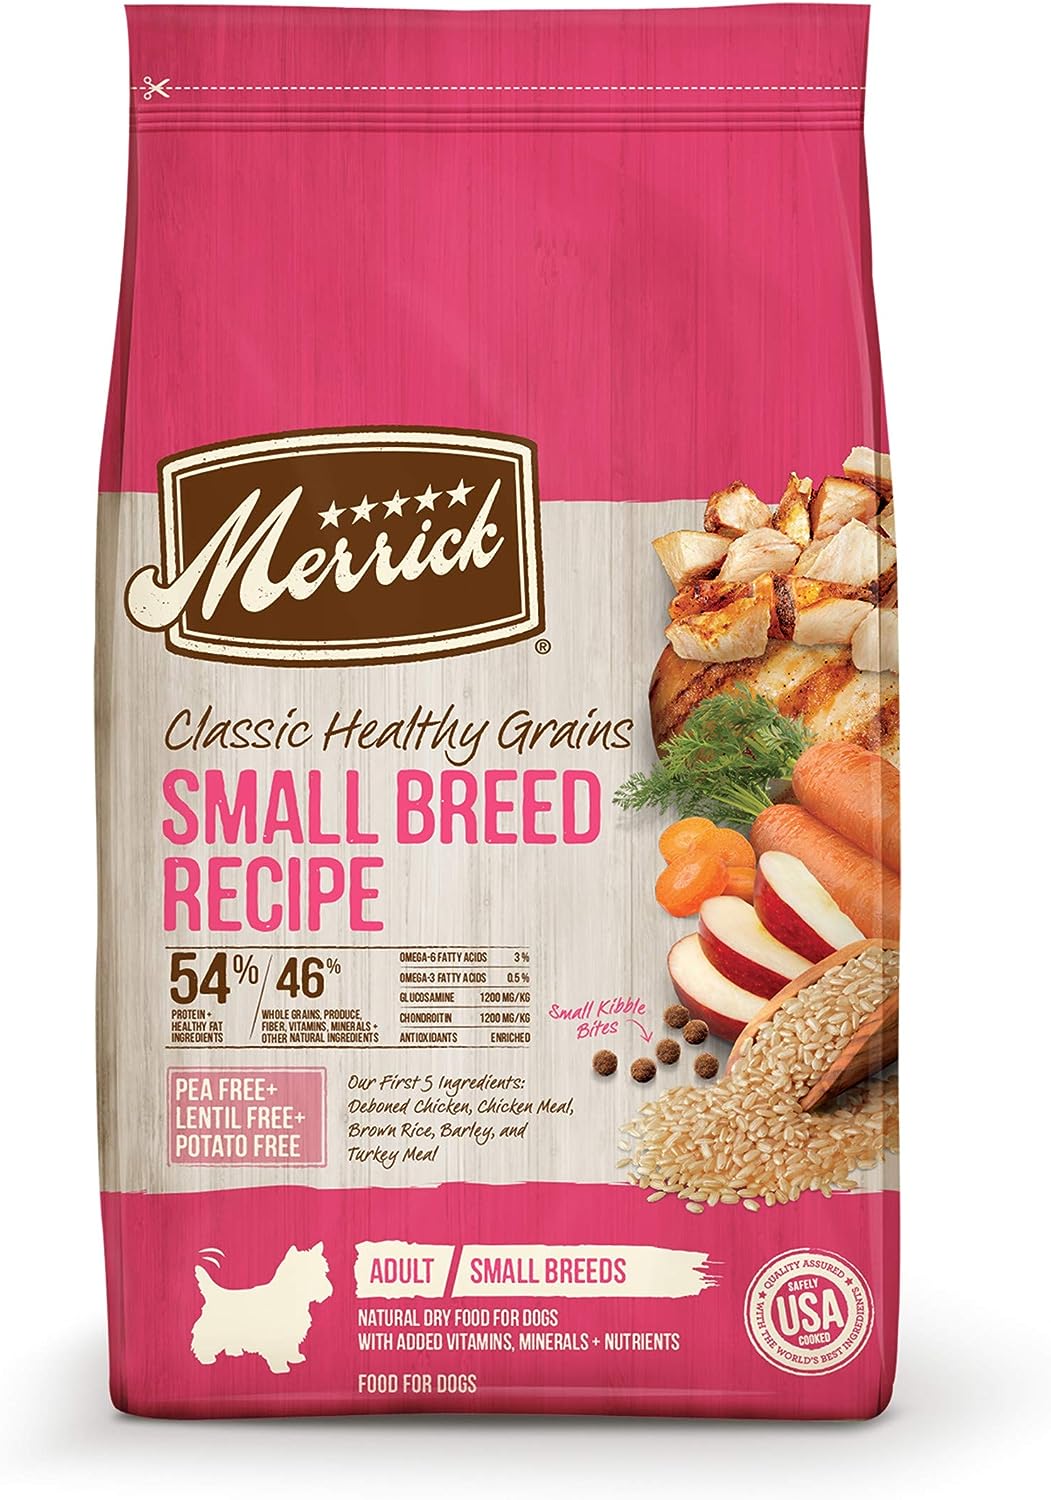 Merrick Classic Healthy Grains Small Breed Recipe Dry Dog Food – Gallery Image 1